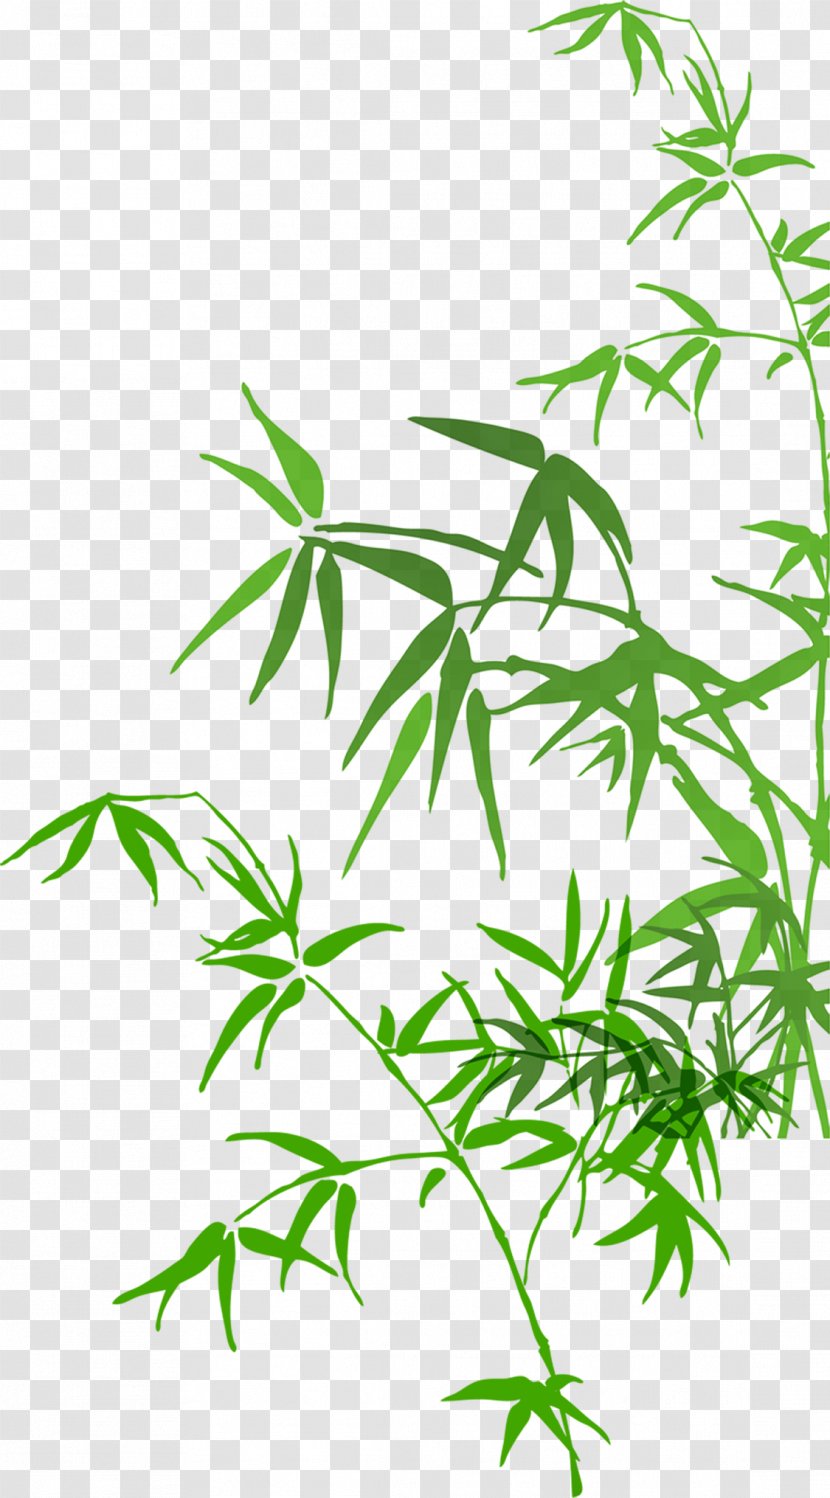 Bamboo Watercolor Painting - Plant Stem Transparent PNG